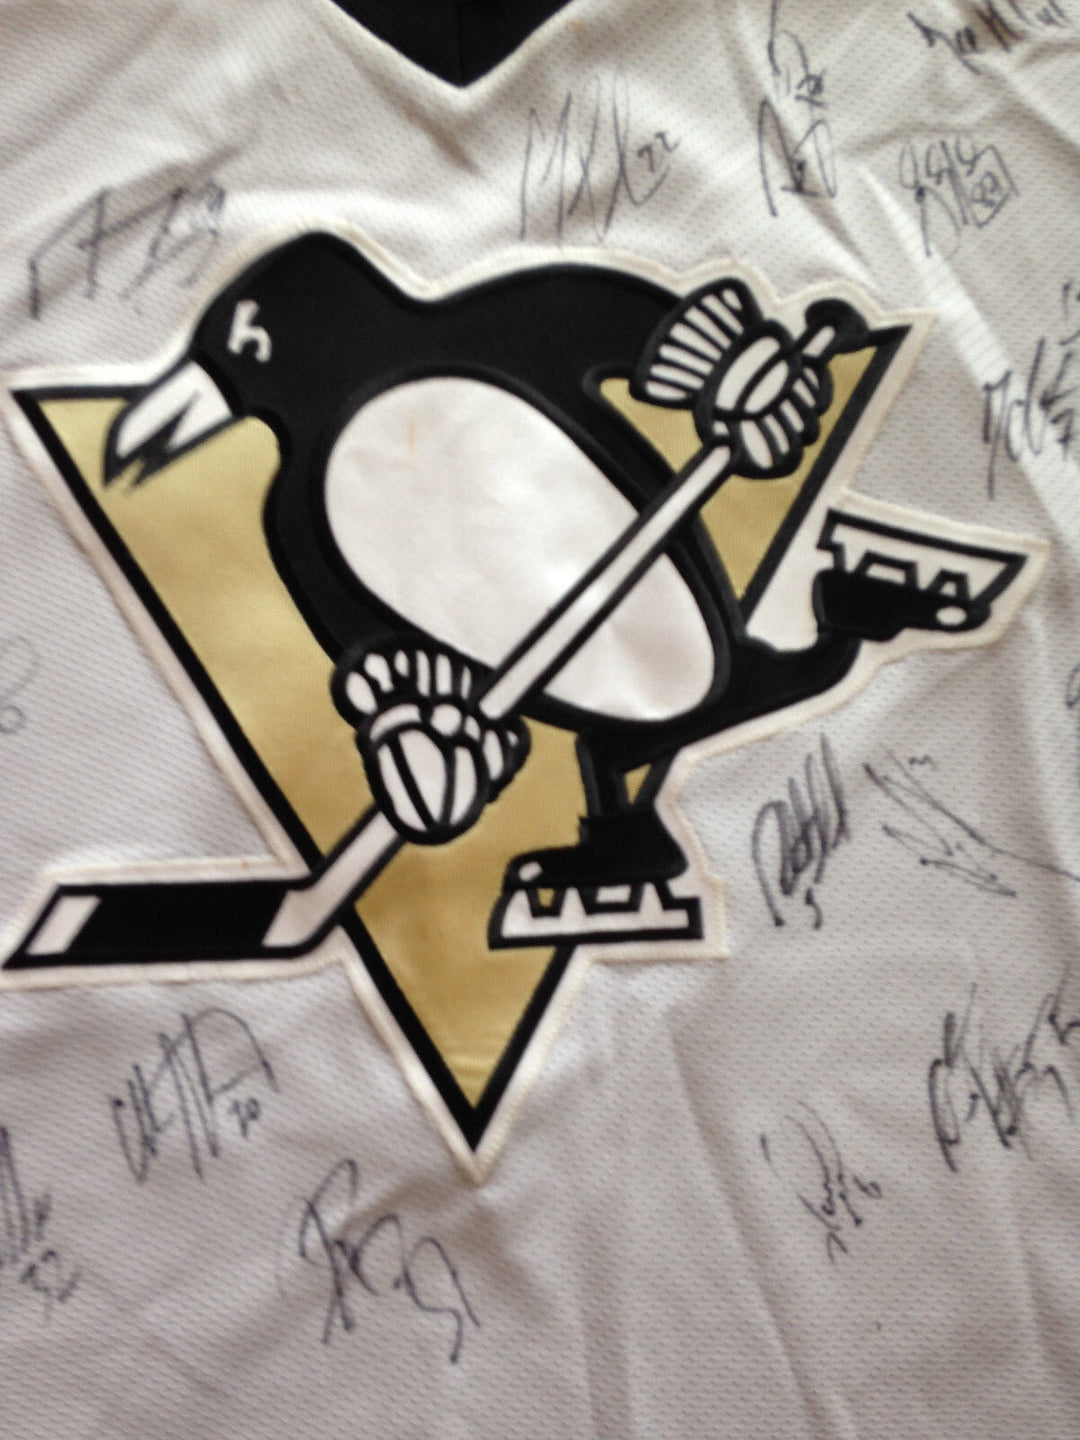 Pittsburgh Penguins 2006 07 team signed Sidney Crosby Practice jersey Auto Jsa Image 3